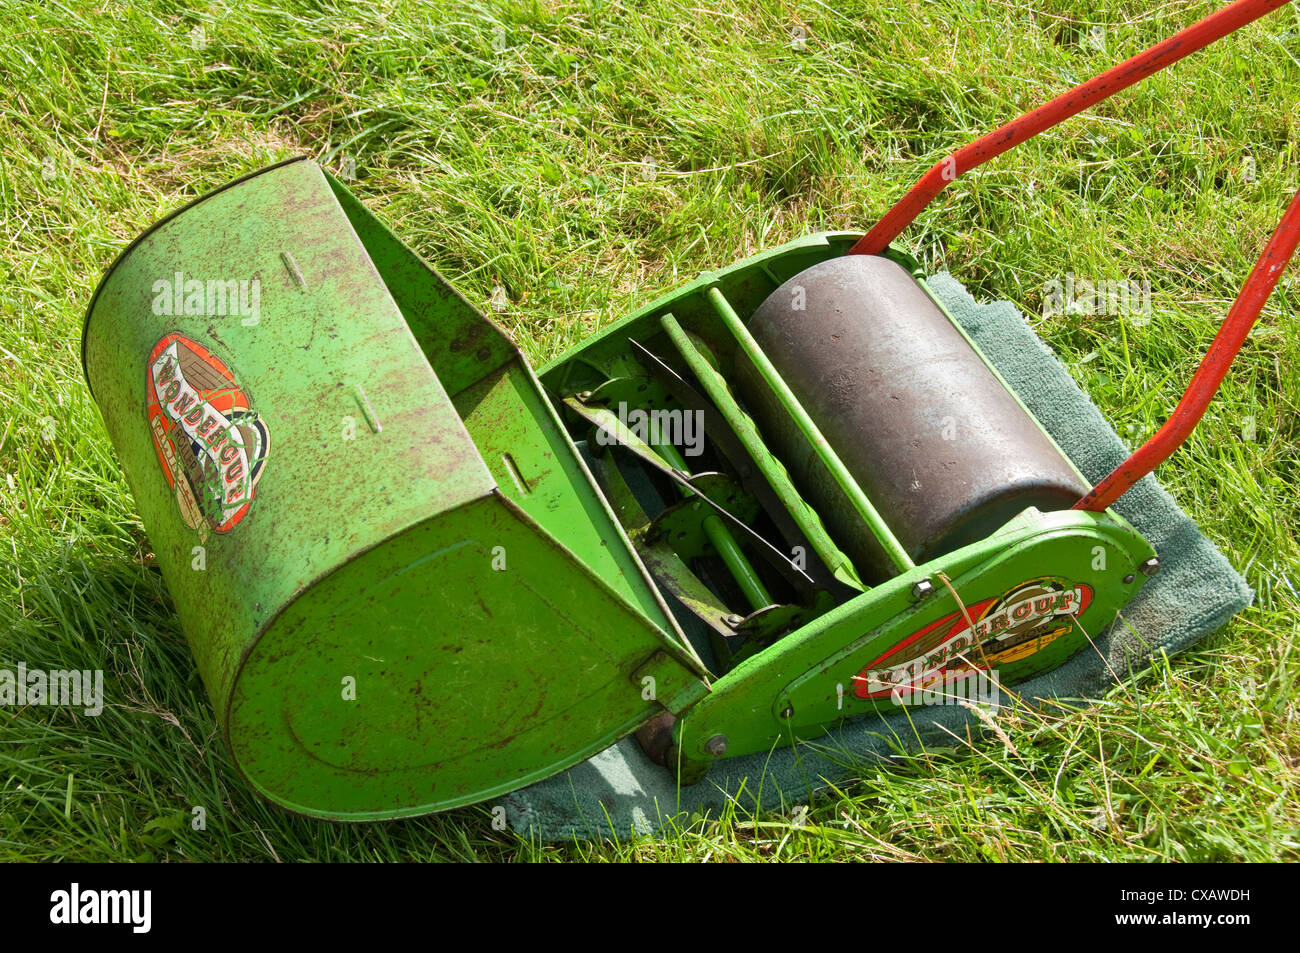 Manual hand grass cutter hi-res stock and images - Alamy